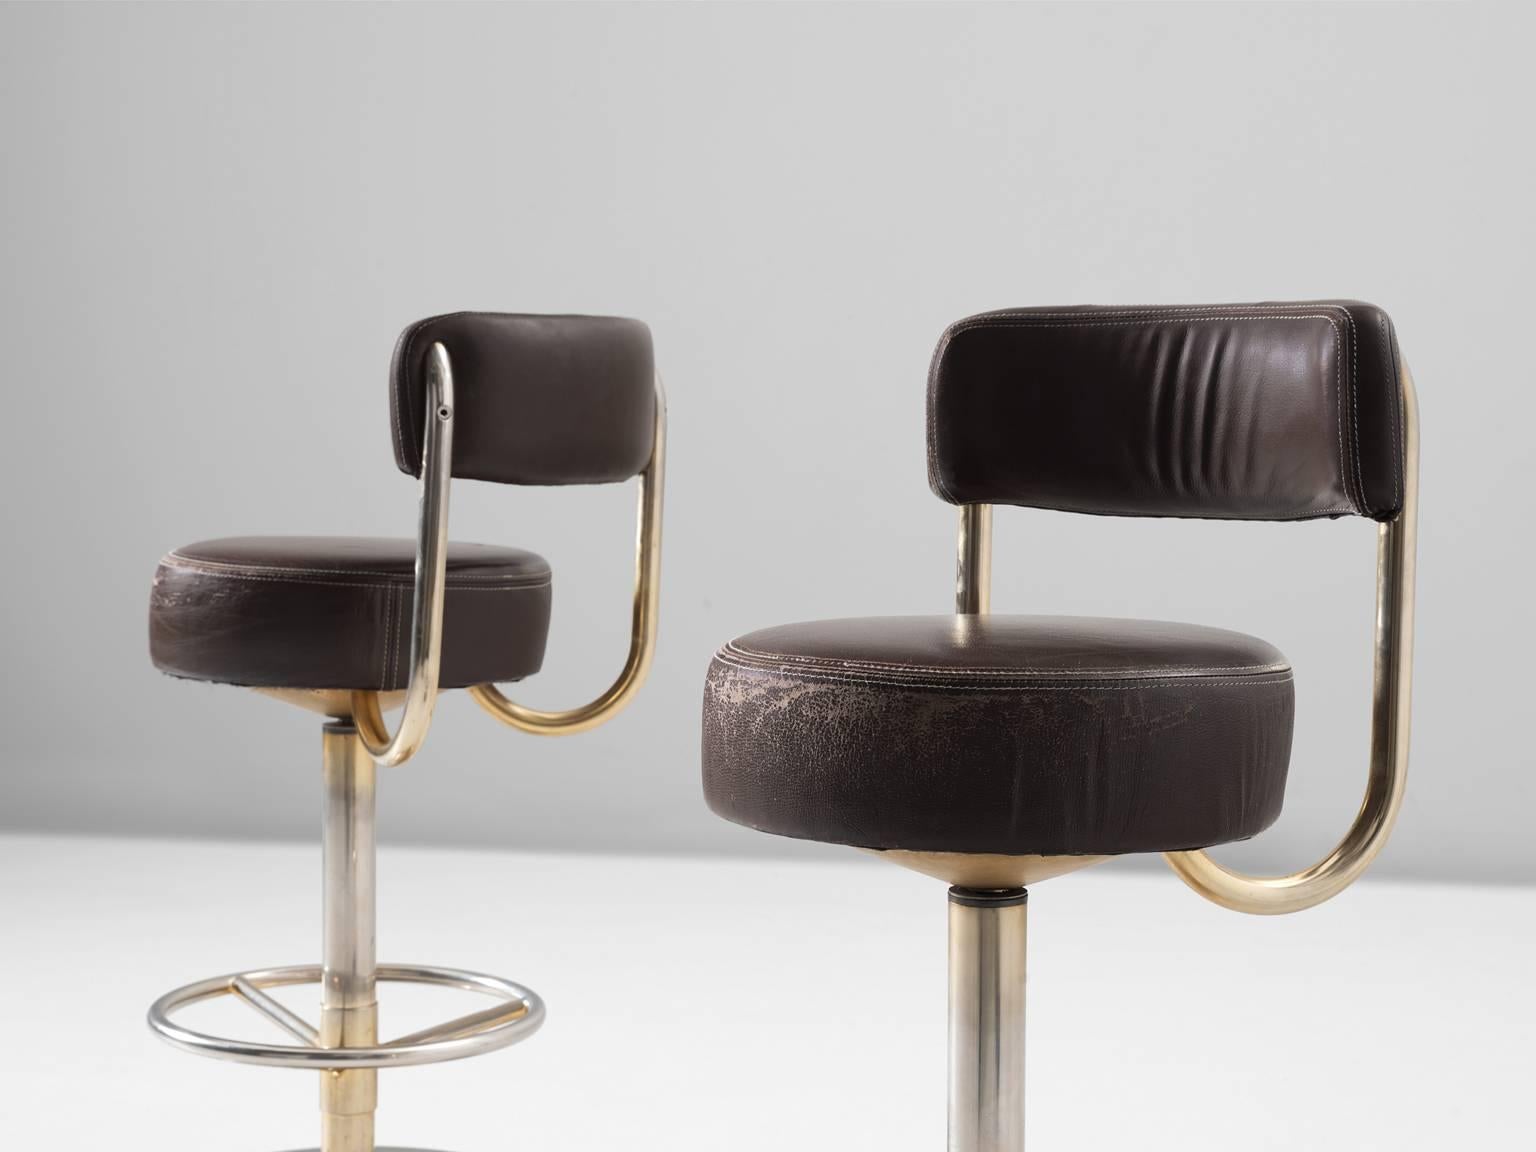 Scandinavian Set of Four Bar Stools in Brass Colored Metal and Brown Leather Upholstery